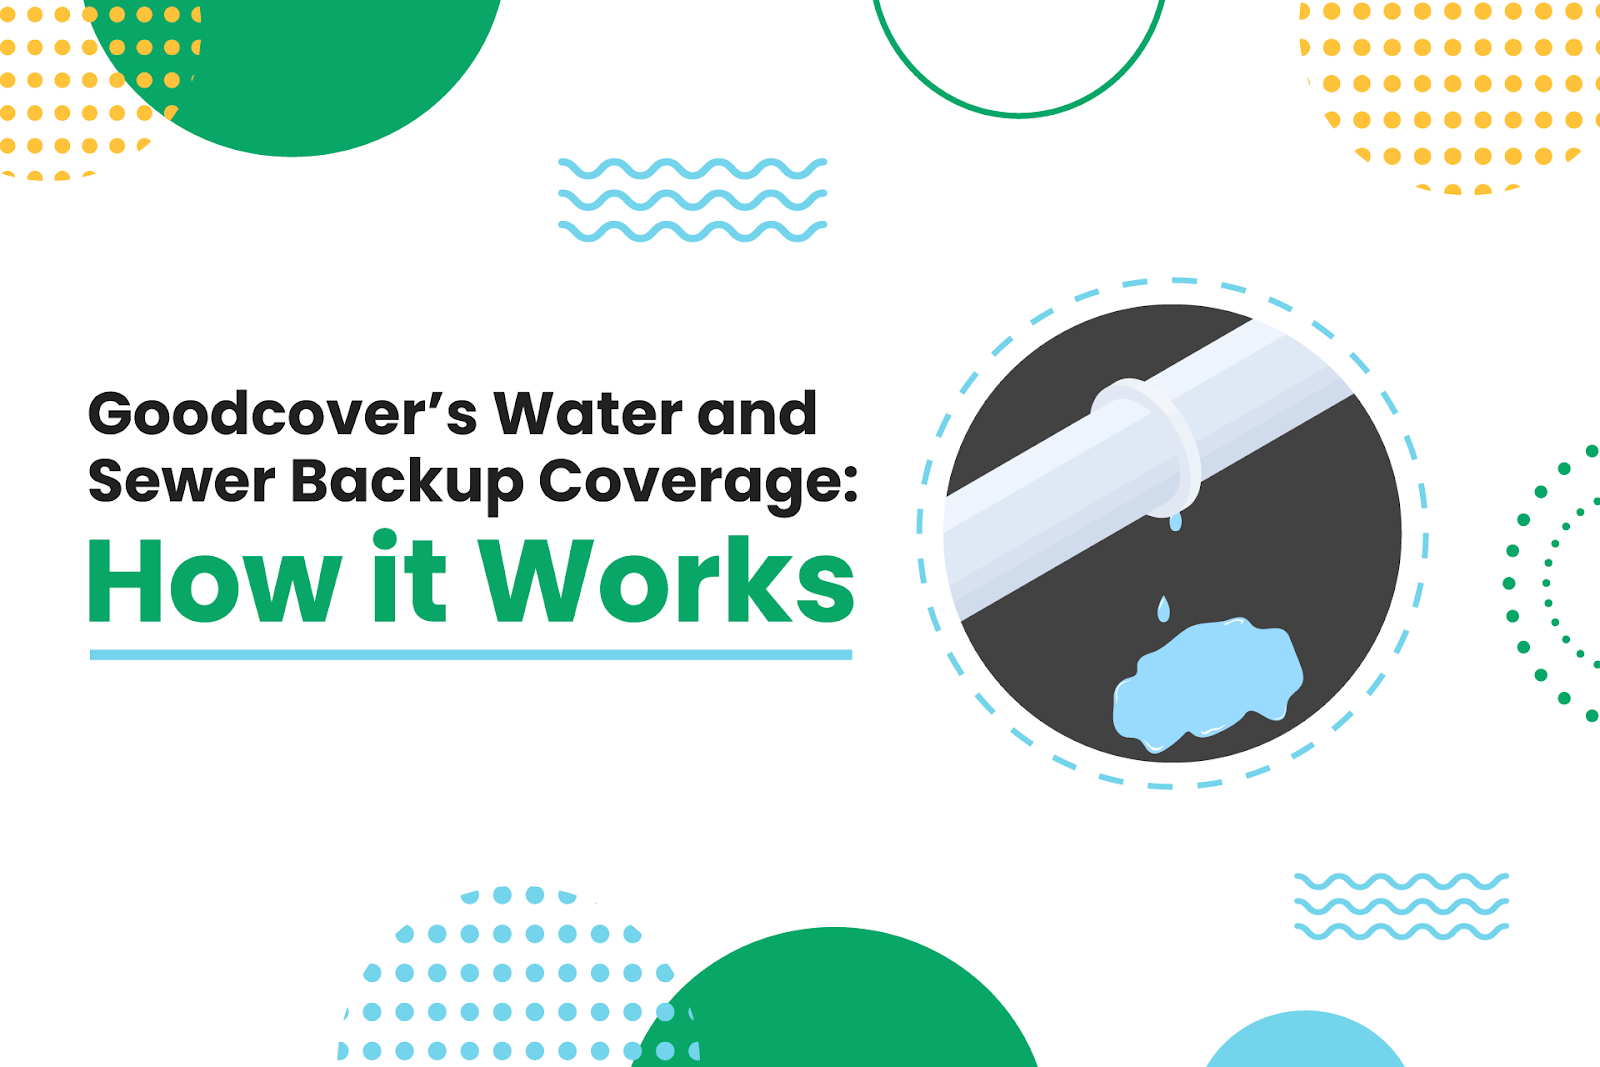 Goodcover’s Water and Sewer Backup Coverage: How It Works